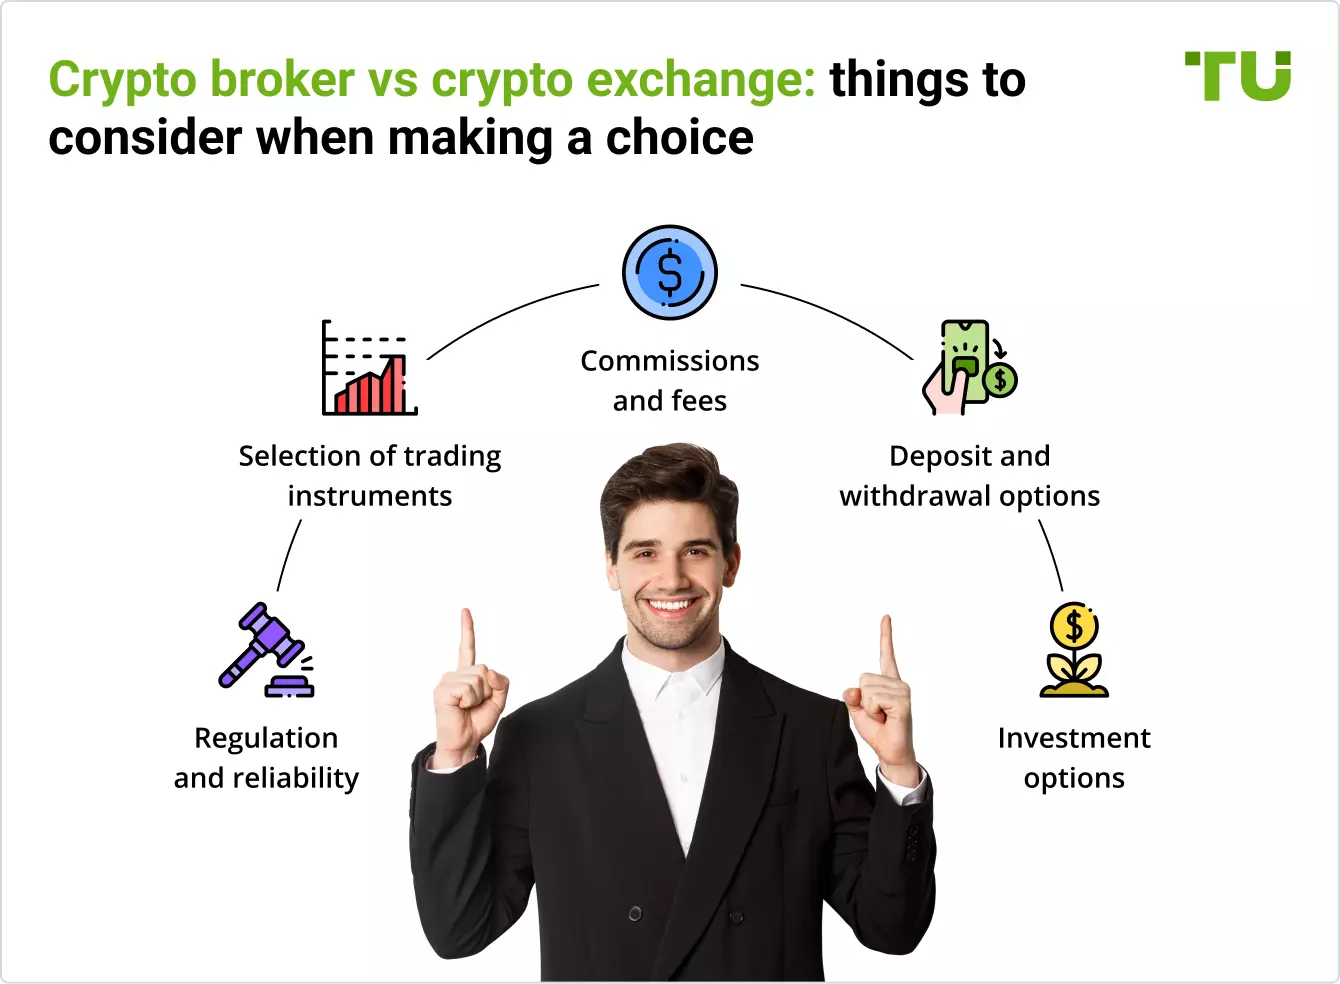 Crypto broker vs crypto exchange: things to consider when making a choice